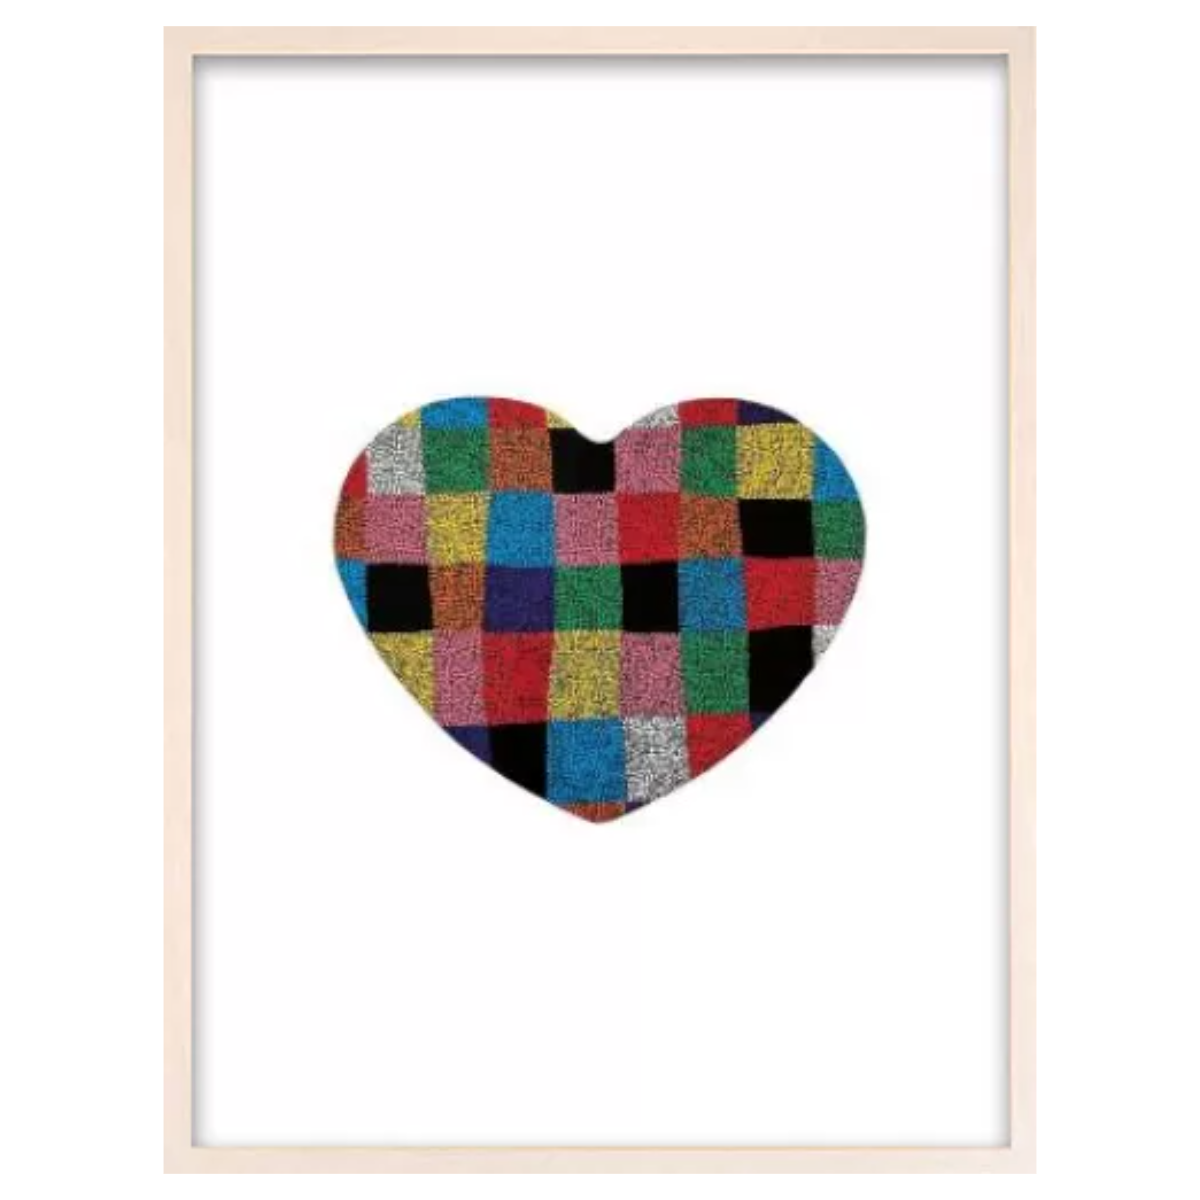 Patchwork Heart 1 / アート